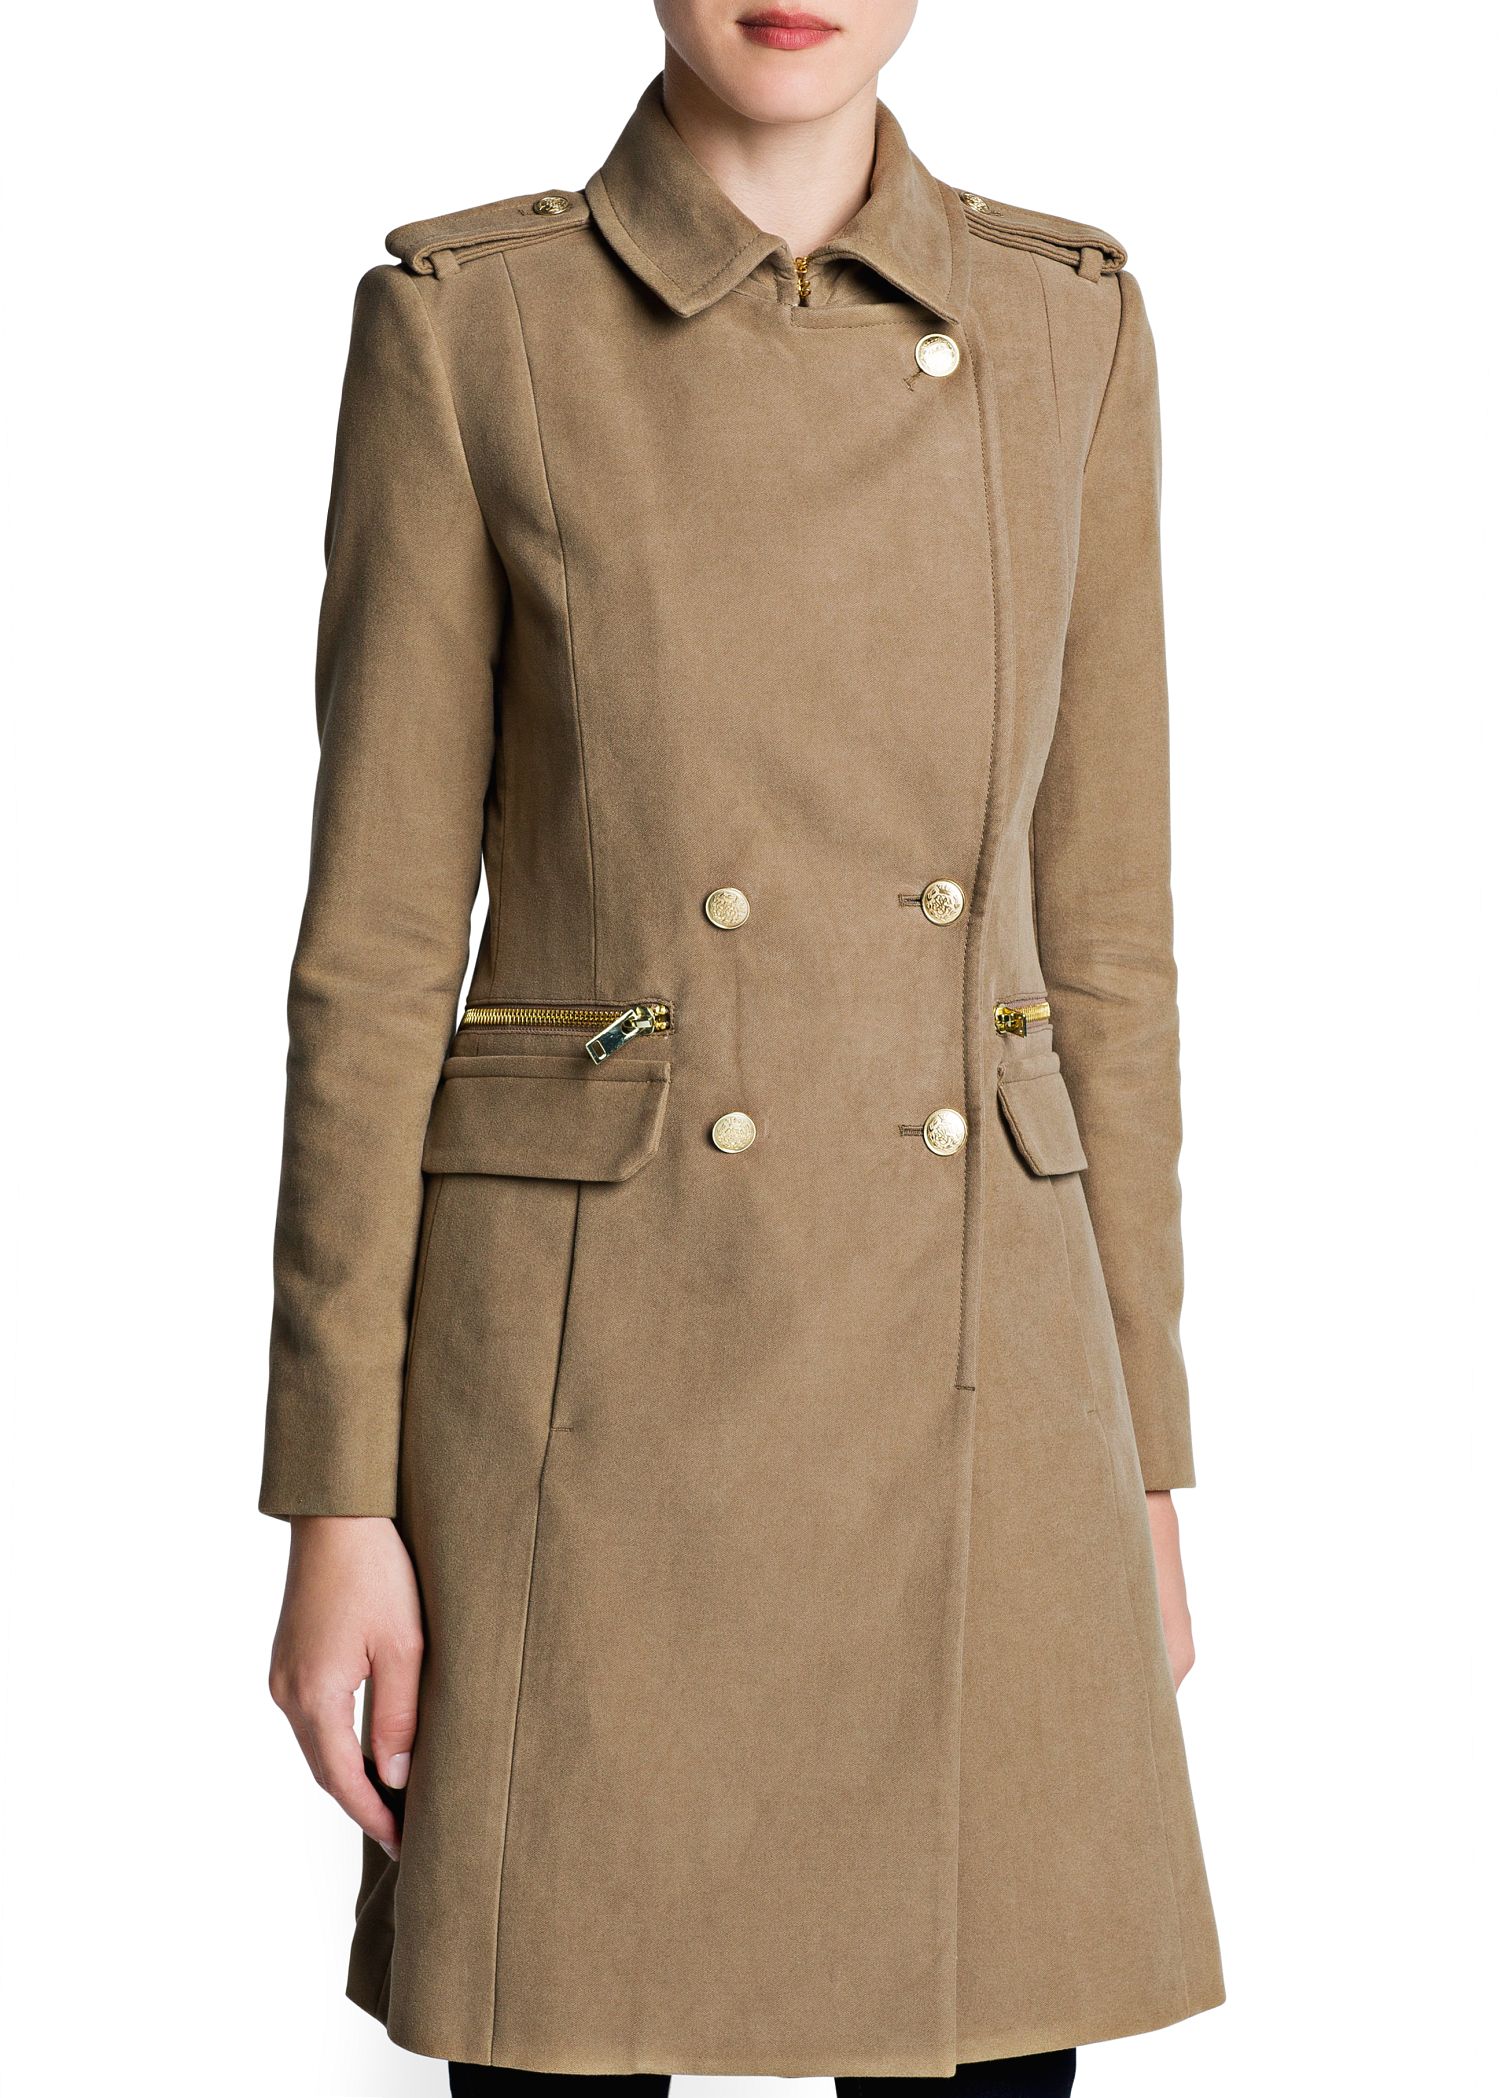 Lyst - Mango Military Style Long Coat in Natural